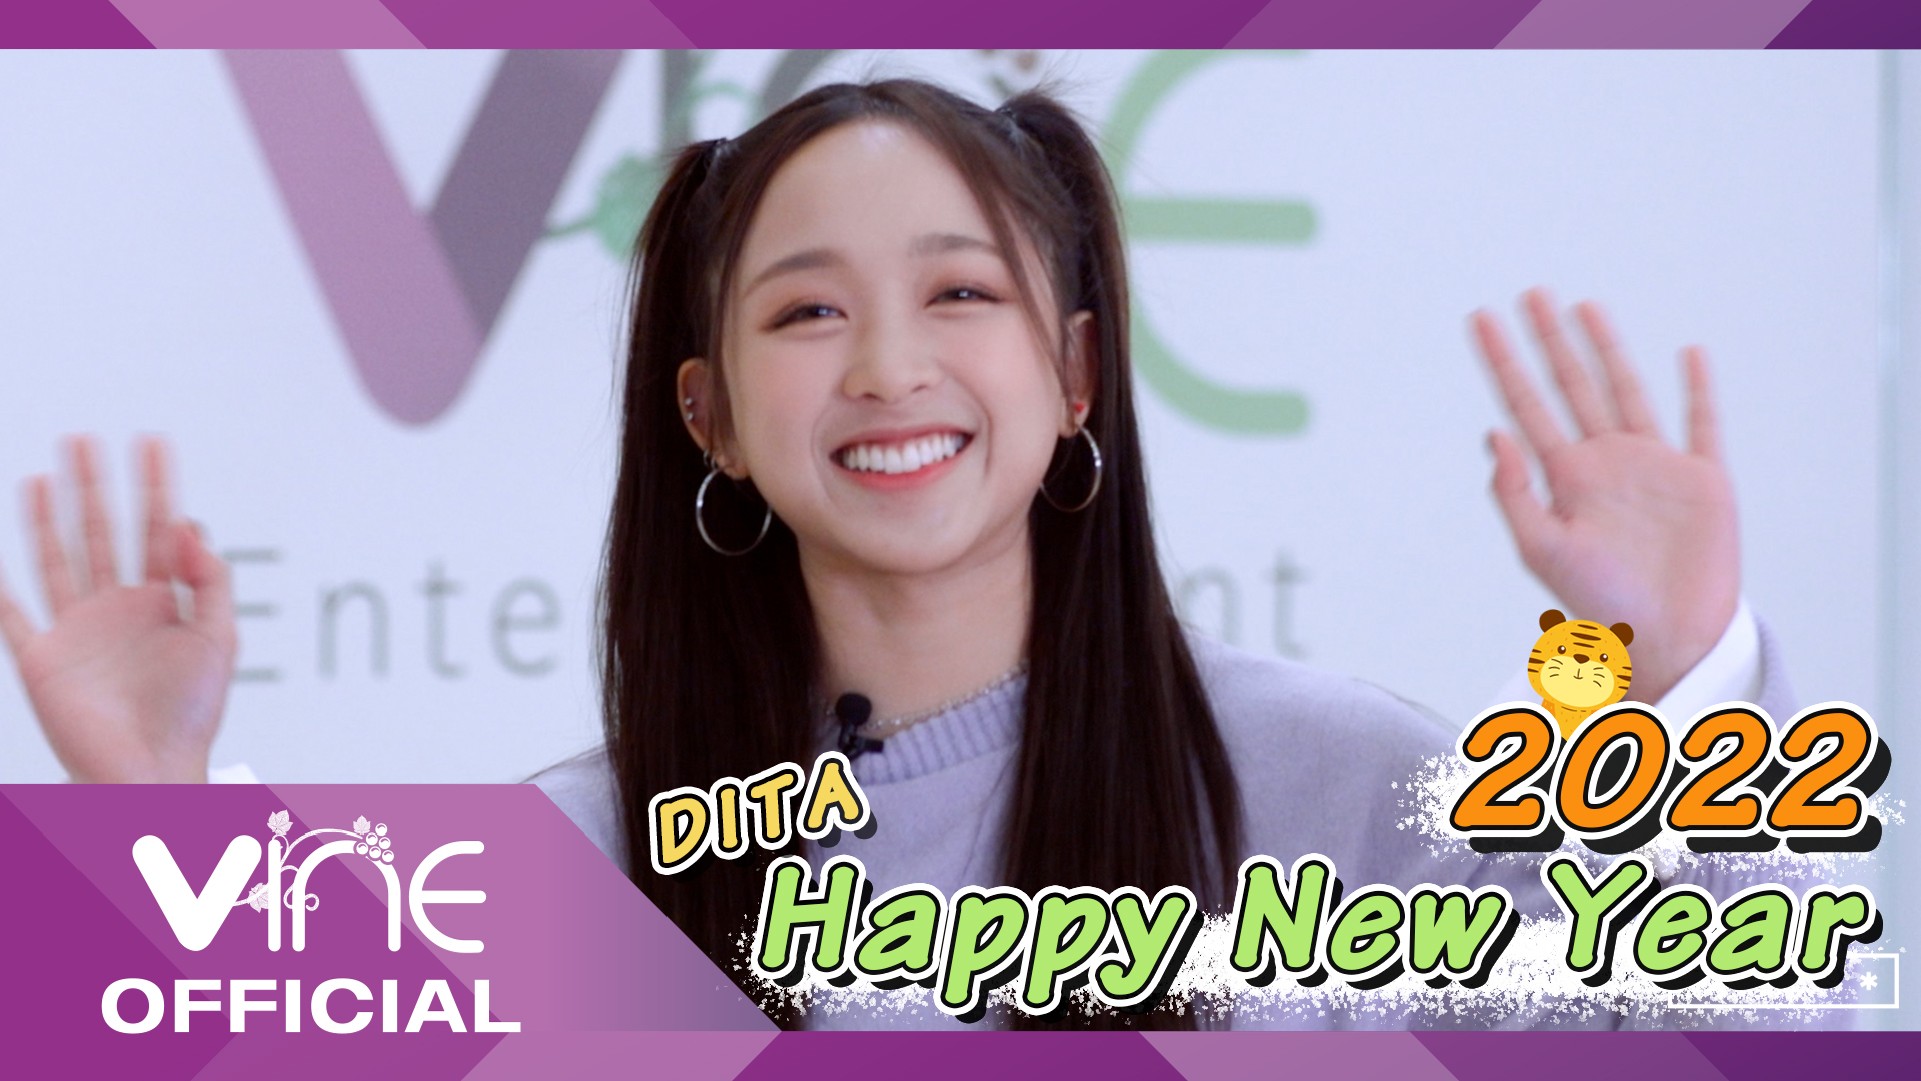 2022 SECRET NEW YEAR GREETING (From. DITA)